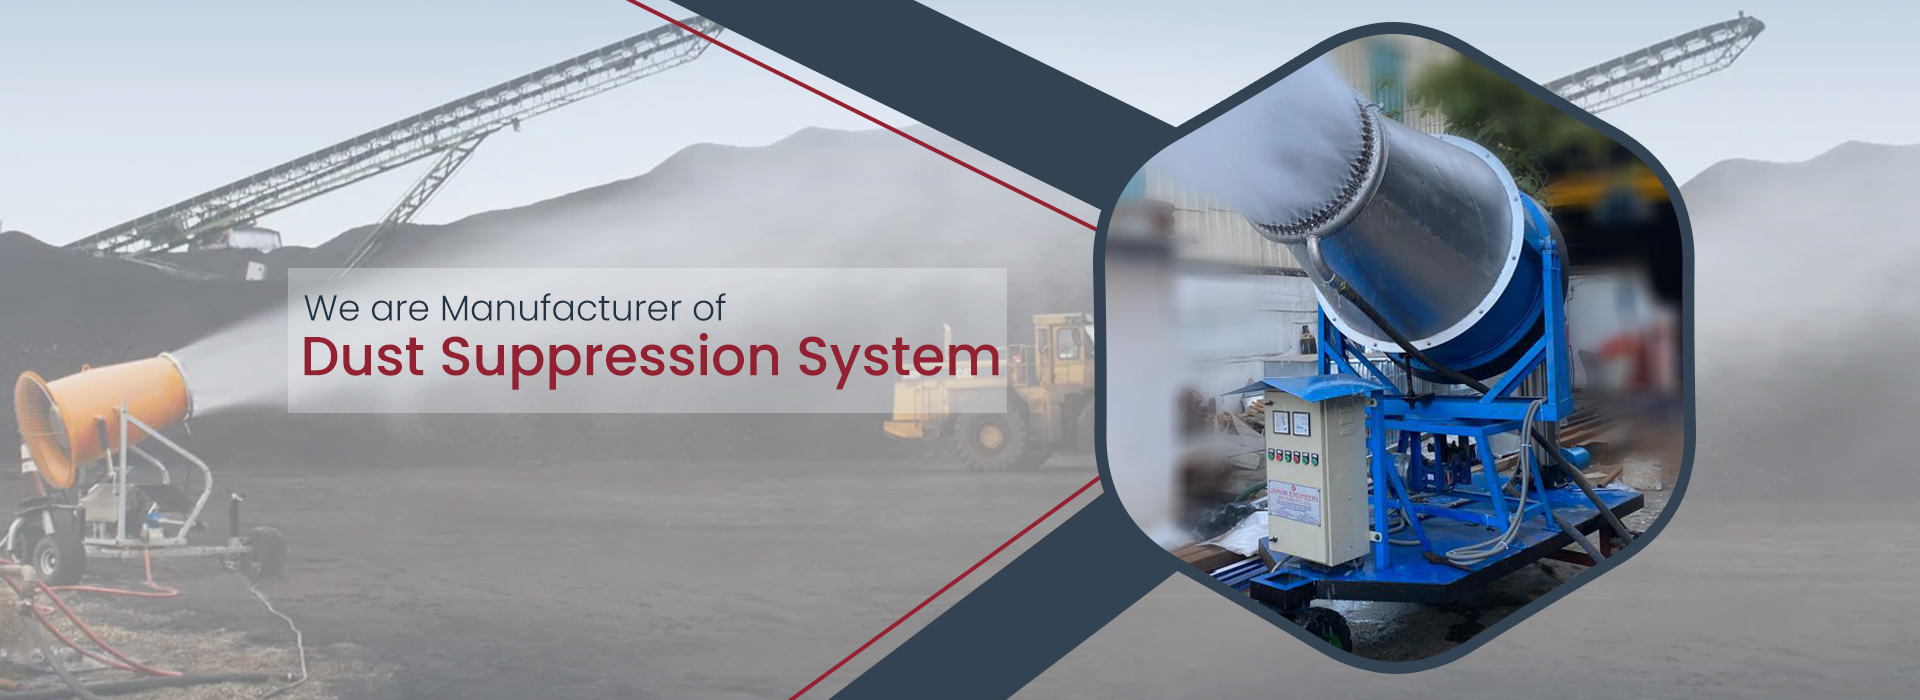 Dust Suppression System Manufacturer in Ahmedabad, India